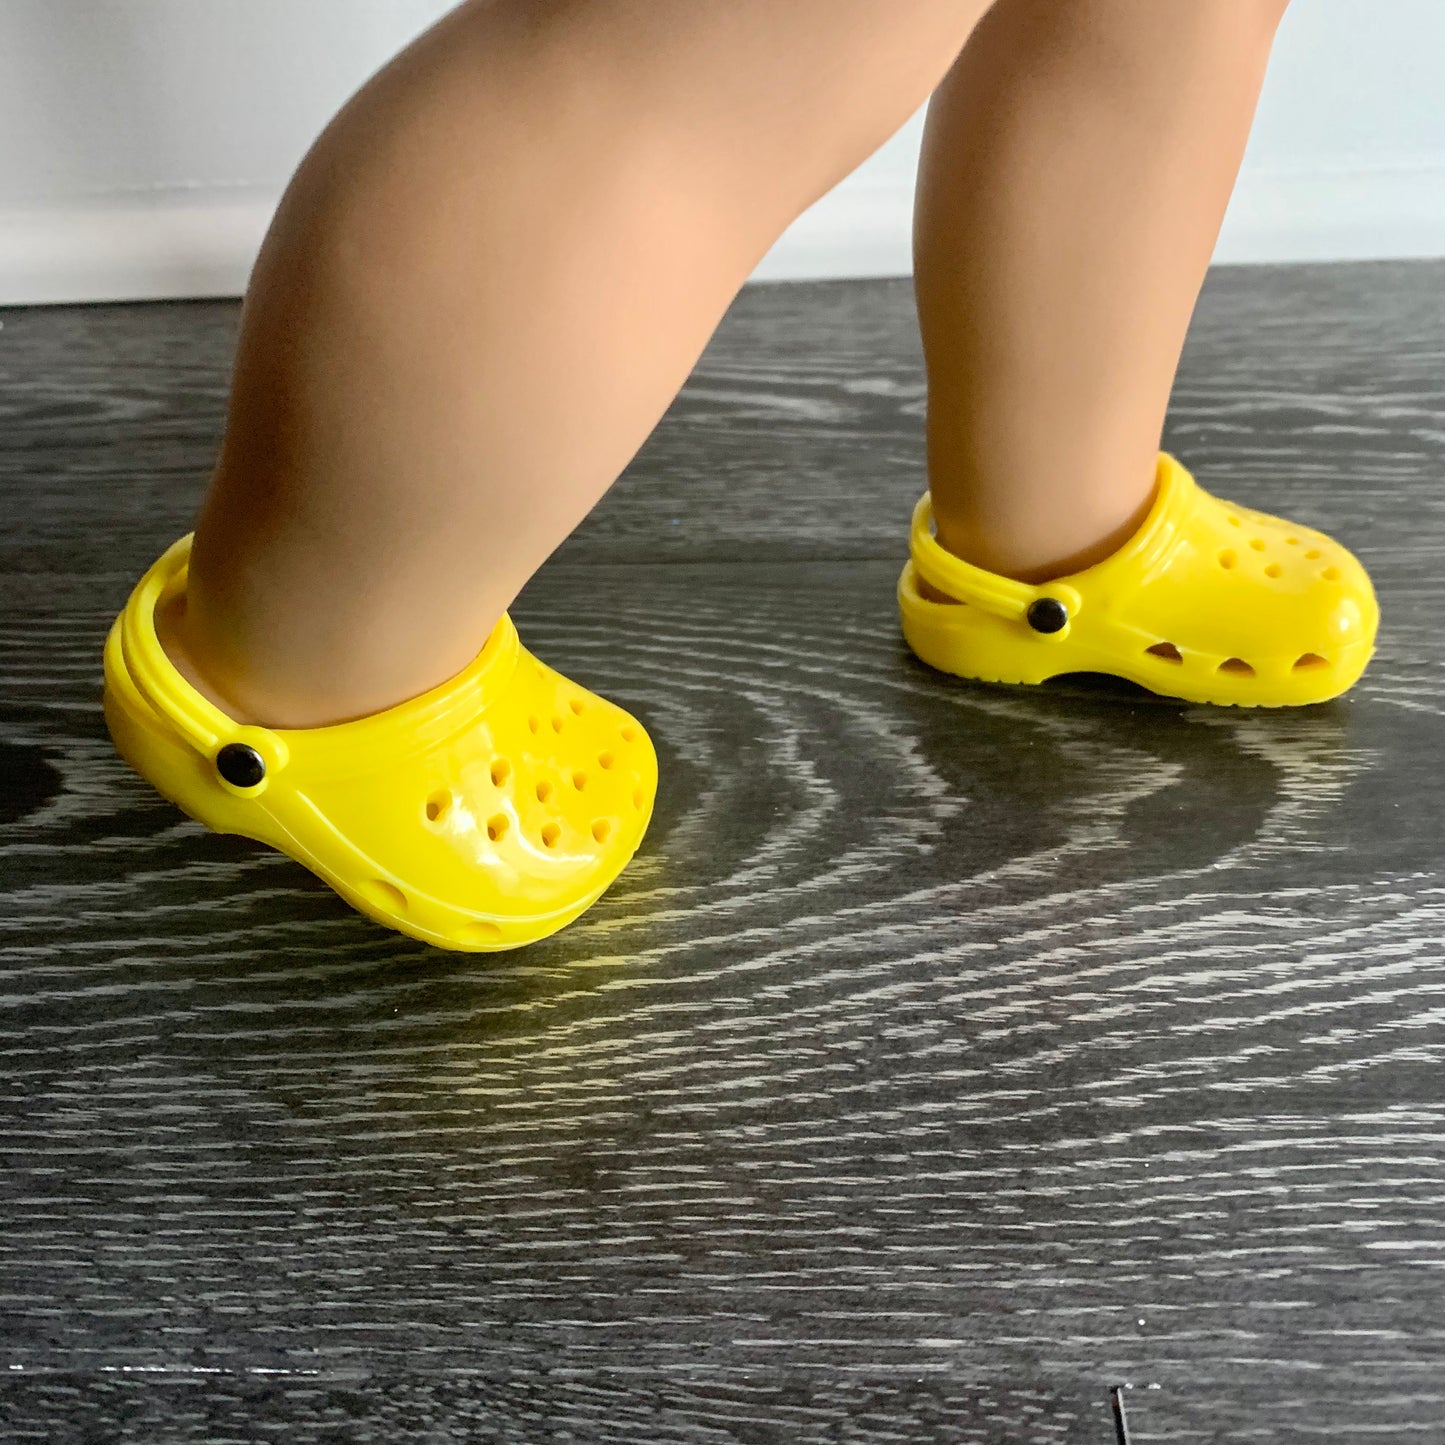 Doll-Sized Crocs (other colors available)